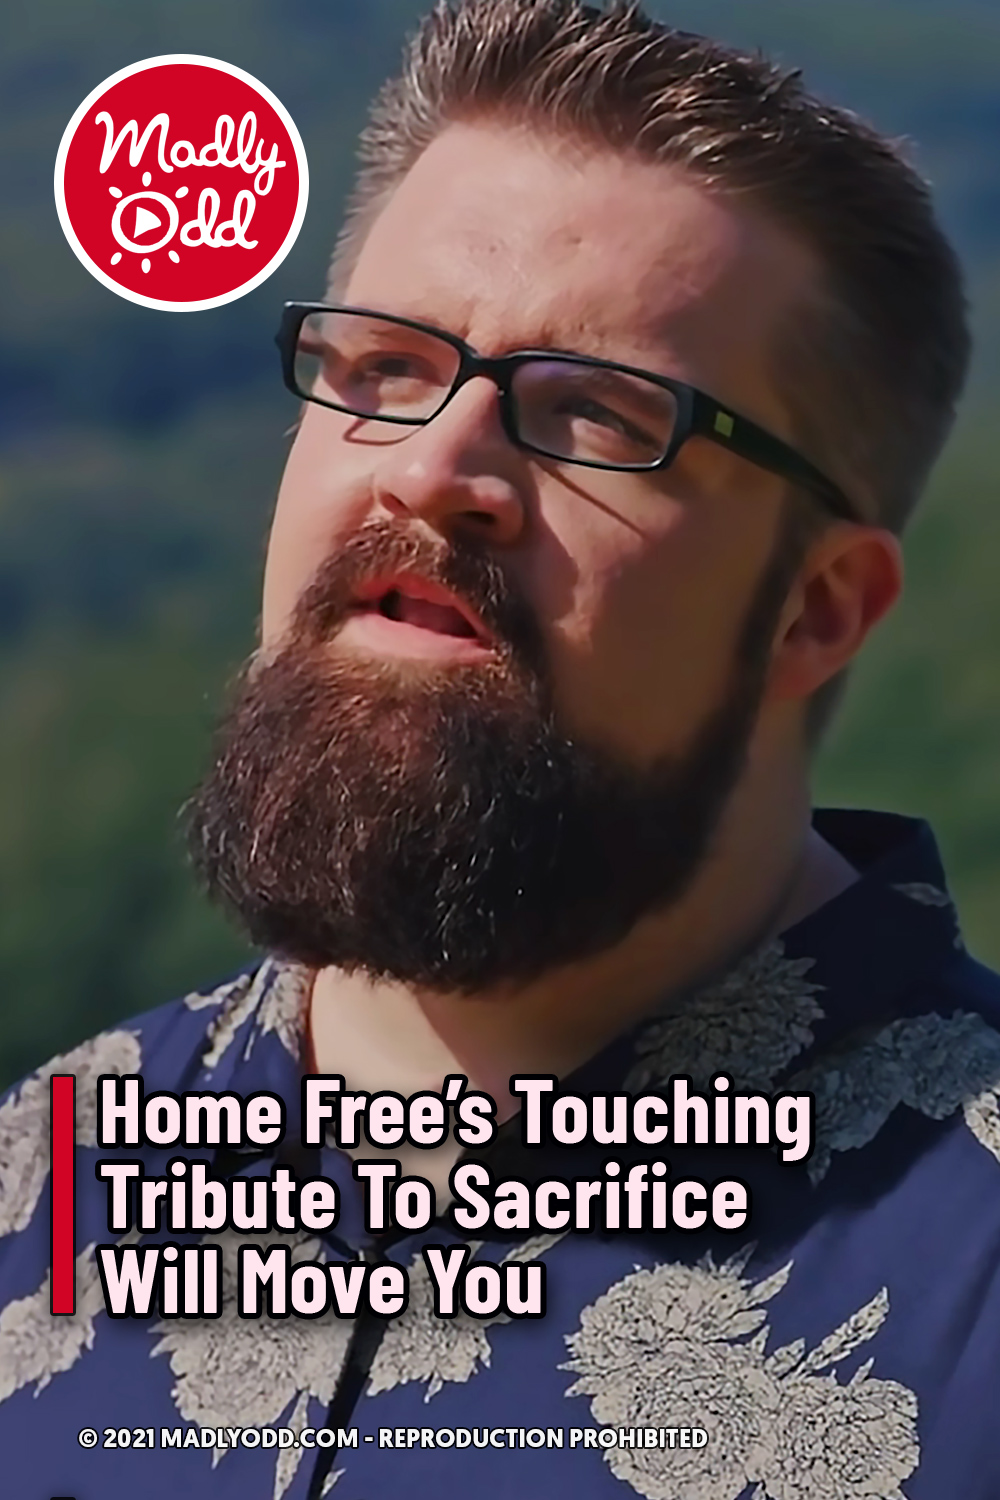 Home Free’s Touching Tribute To Sacrifice Will Move You